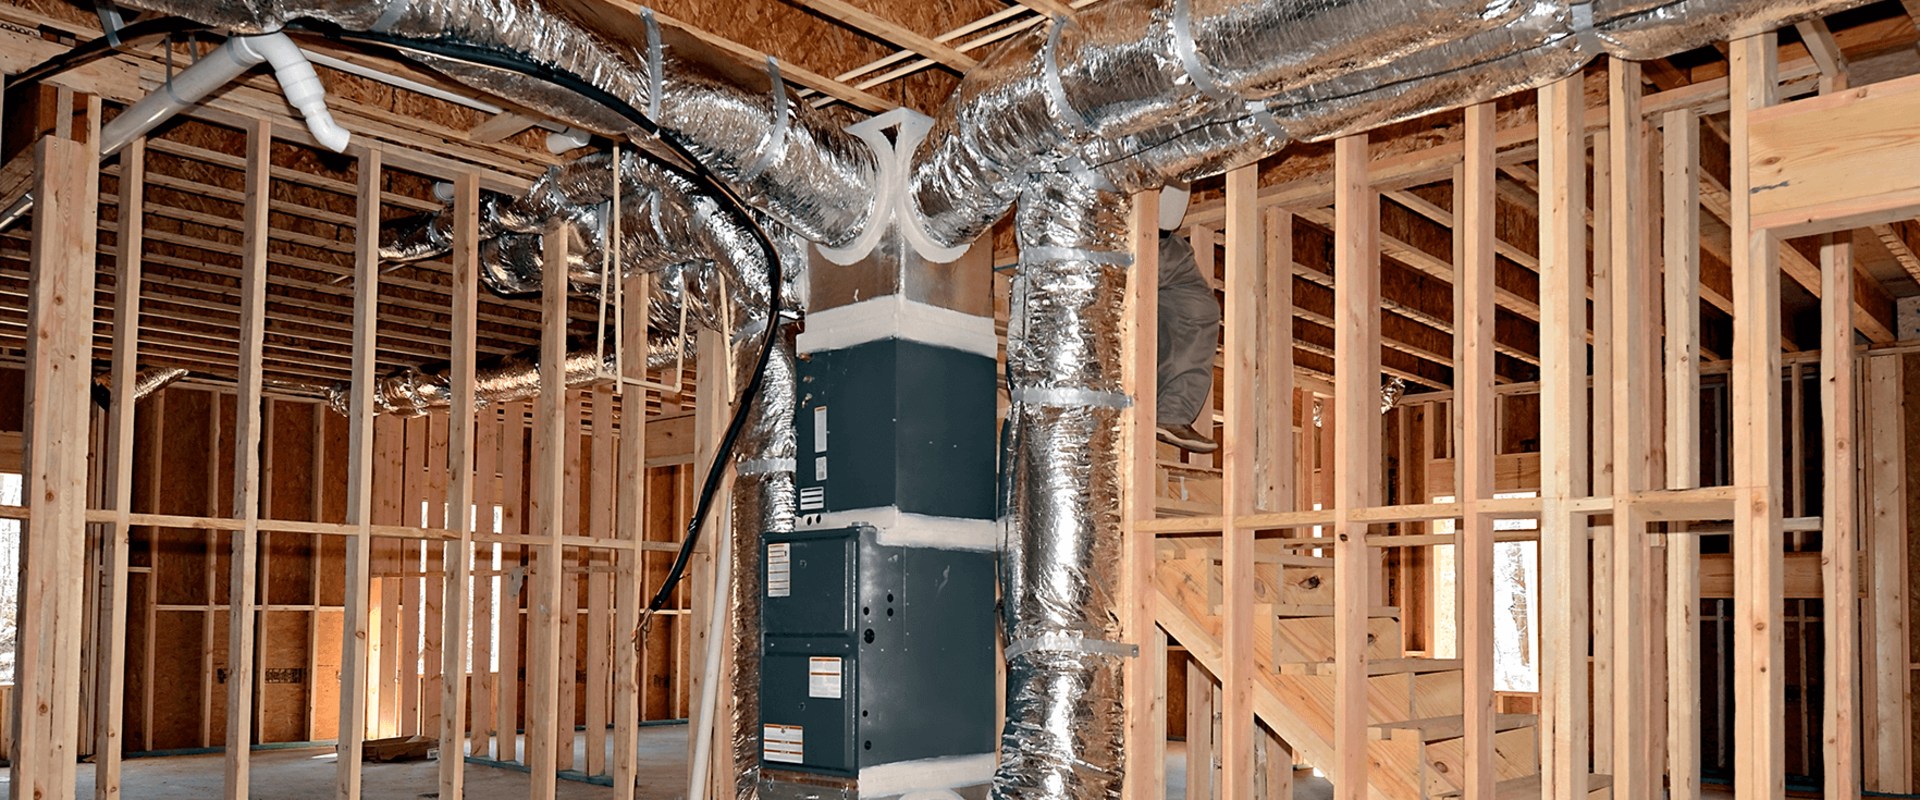 What are the disadvantages of duct sealing?